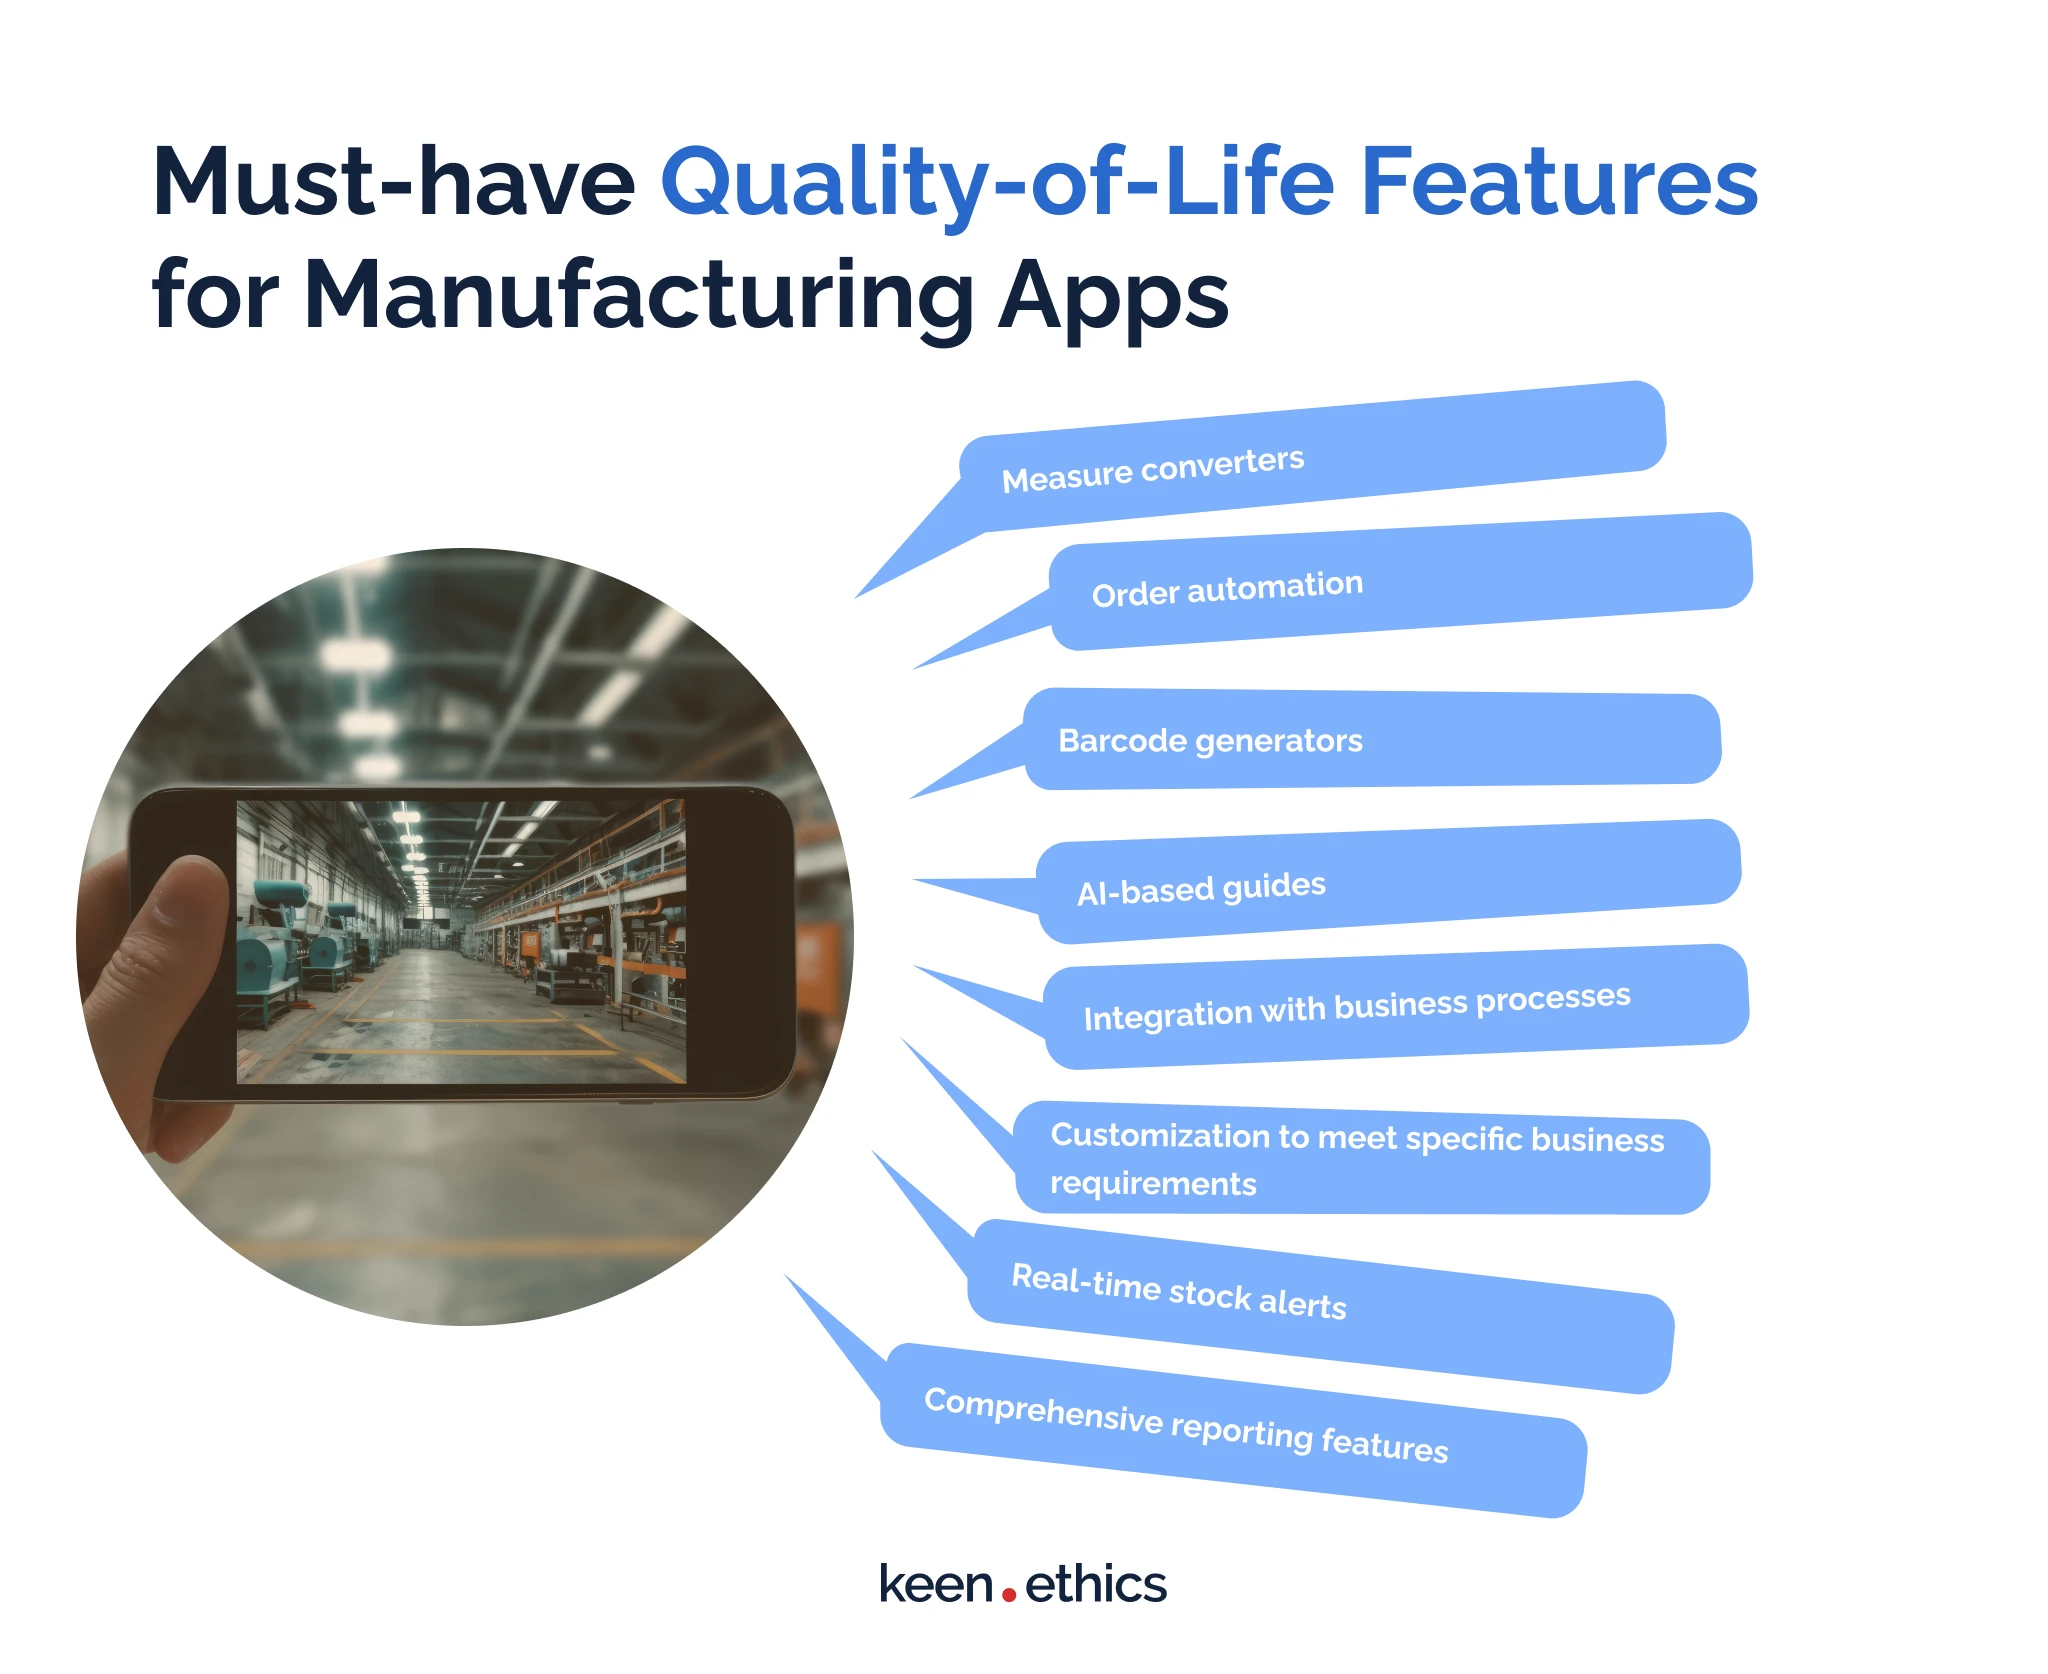 Must-have quality of life features for manufacturing apps